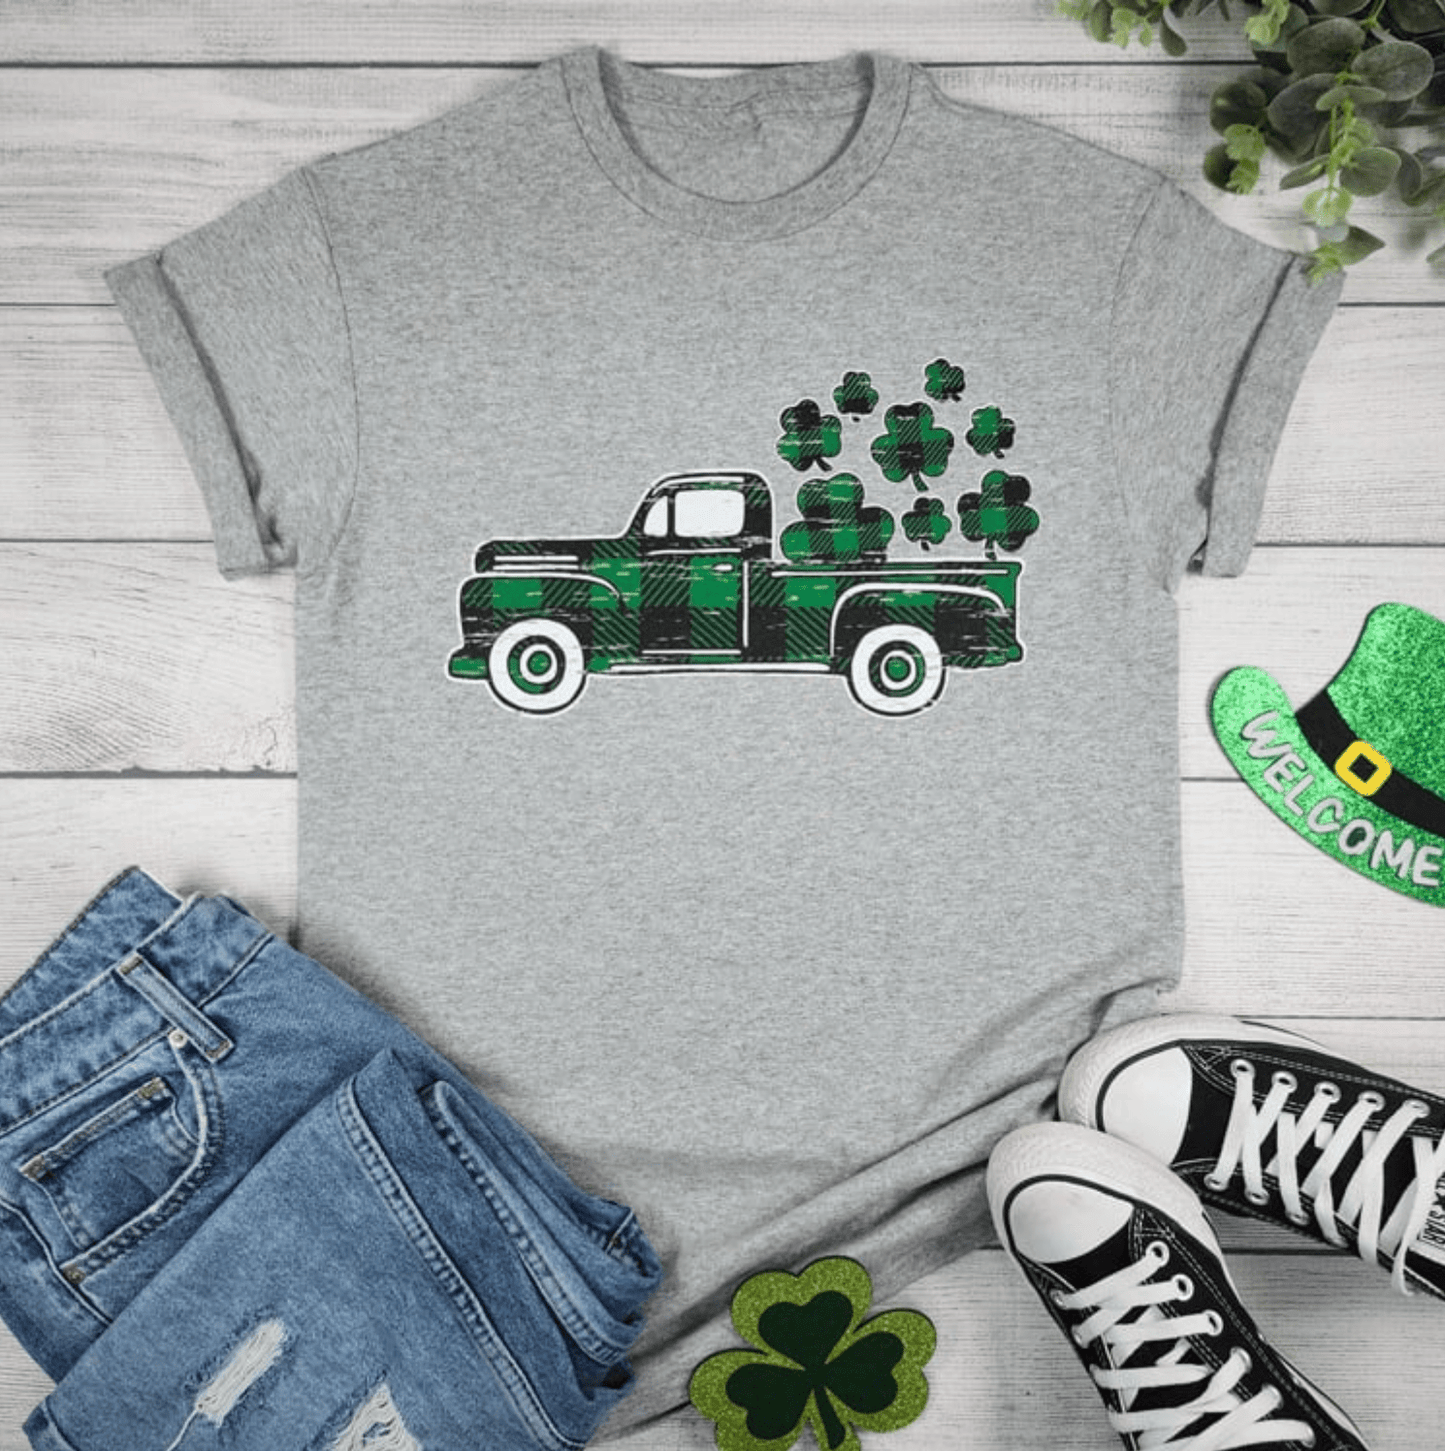 Envy Stylz Boutique Women - Apparel - Shirts - T-Shirts St. Patricks Day Truck Graphic Tee